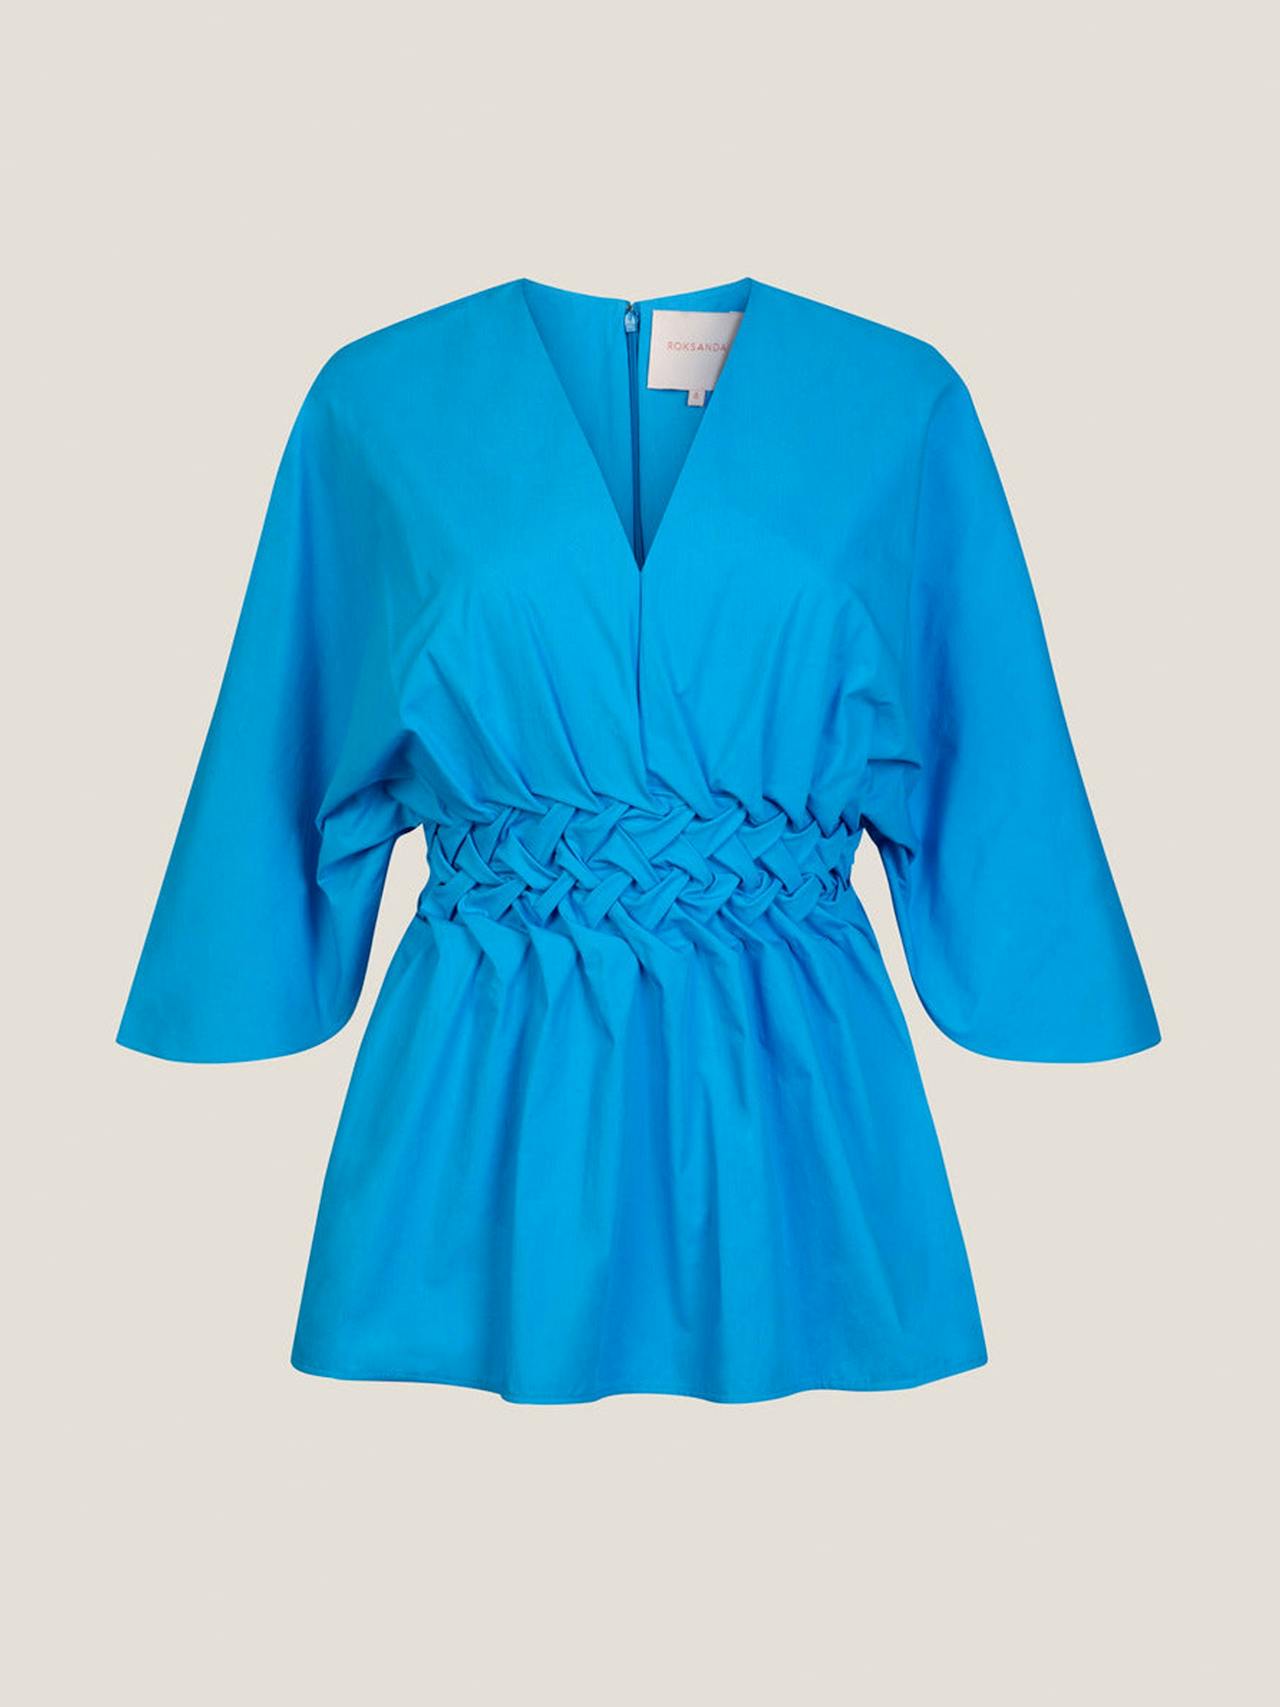 Enya olympic blue cotton top